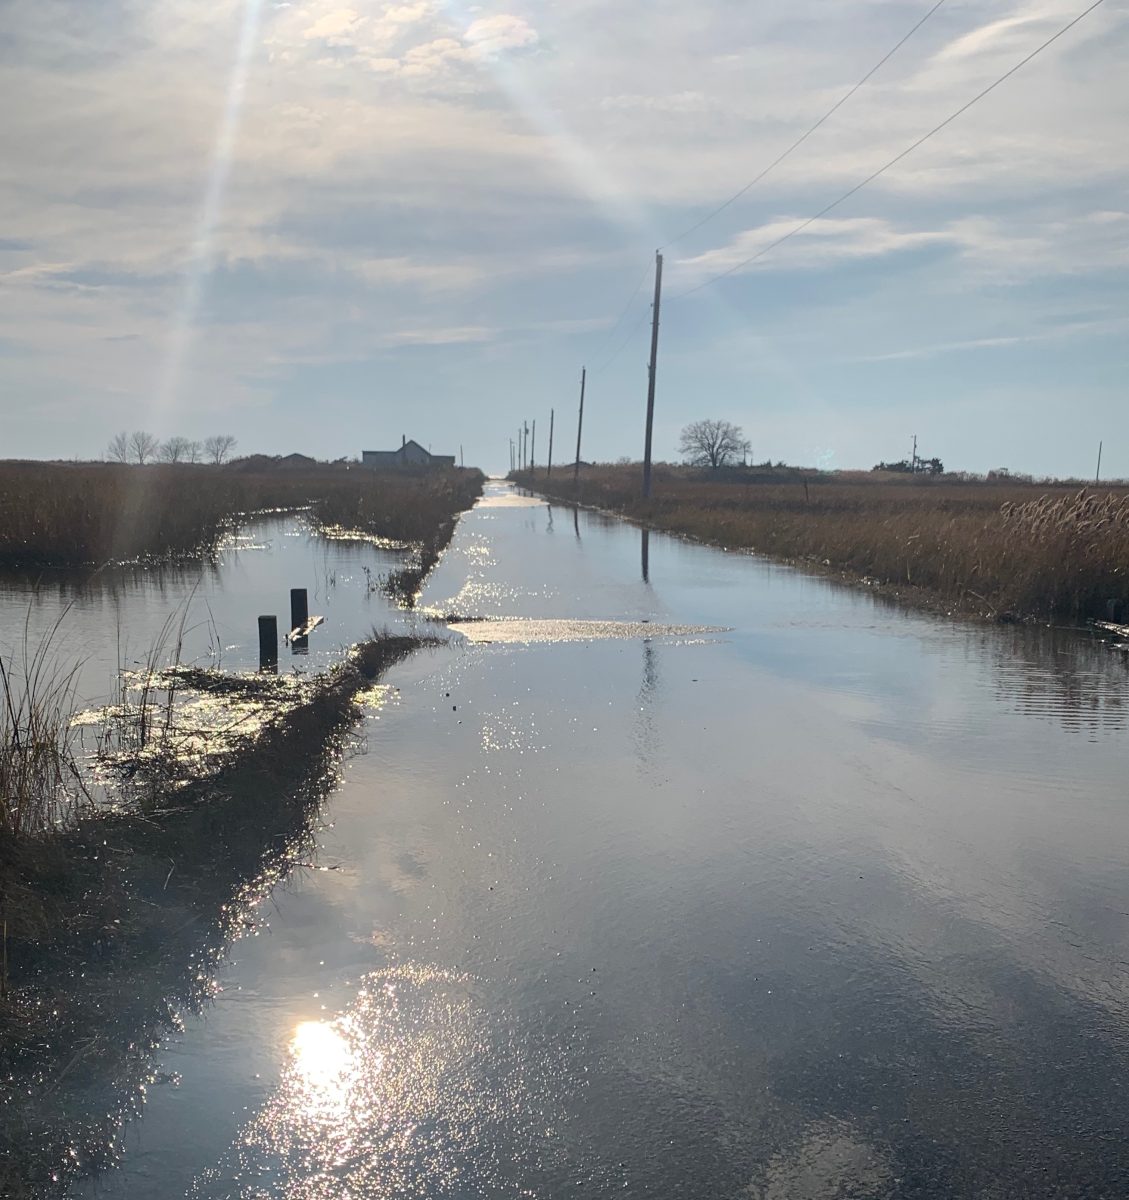 Seabreeze+Road%2C+the+main+street+that+leads+into+the+community%2C+is+covered+on+either+side+by+salt+marshes+and+the+tide+slowly+floods+the+road.+Photo+by+Chris+Friend.+